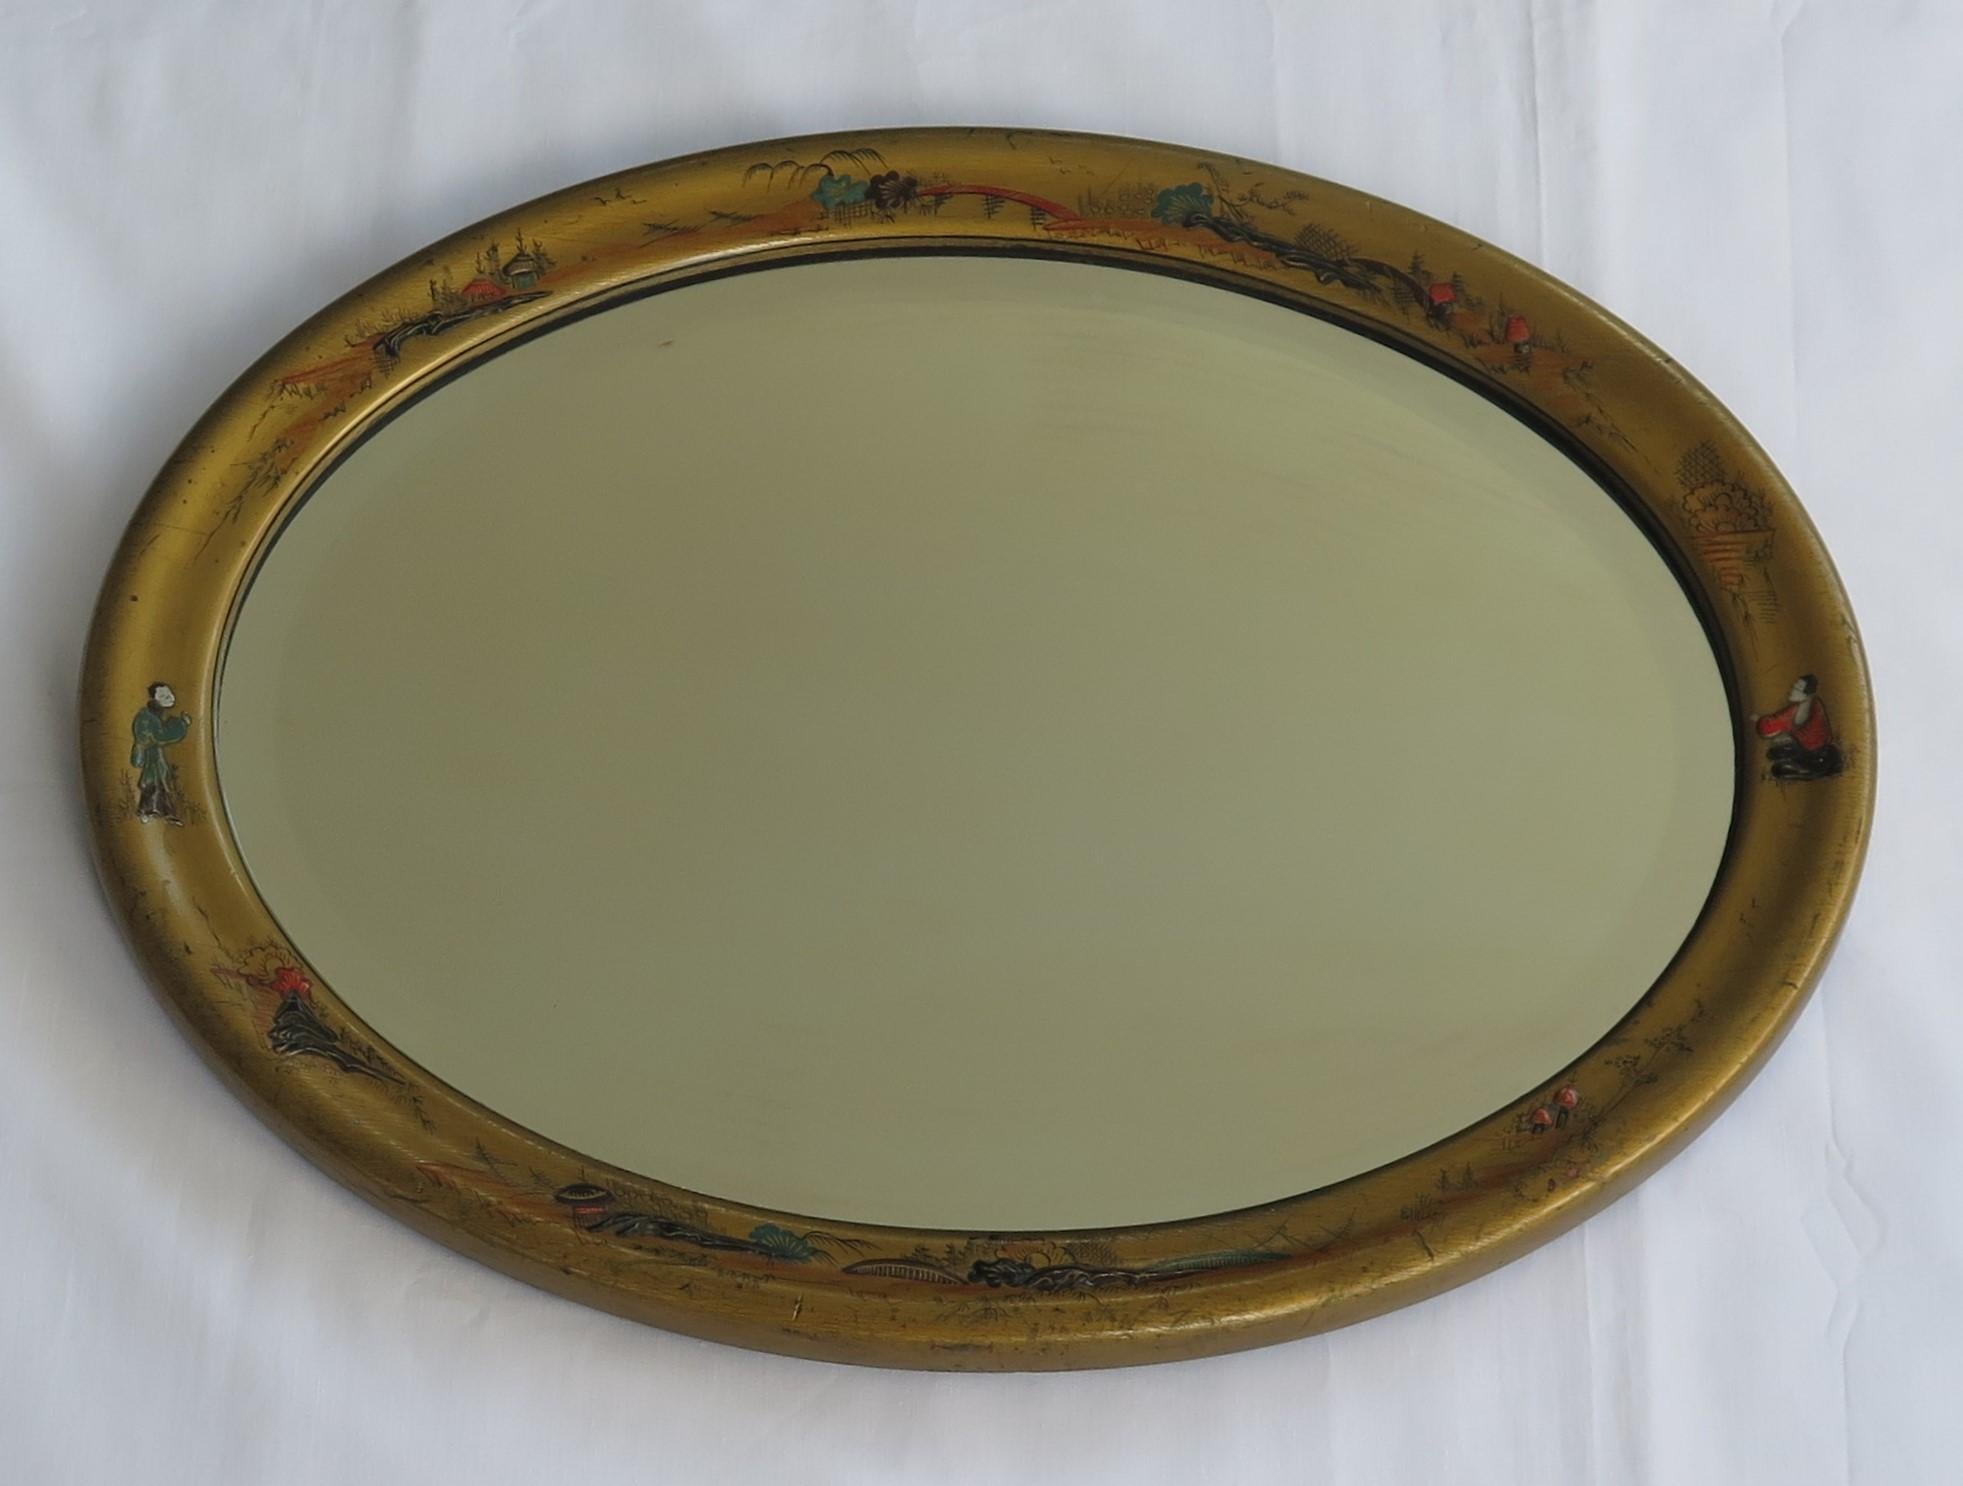 Oval Edwardian Gilt Chinoiserie Wall Mirror Bevelled Glass, English circa 1900 In Good Condition For Sale In Lincoln, Lincolnshire